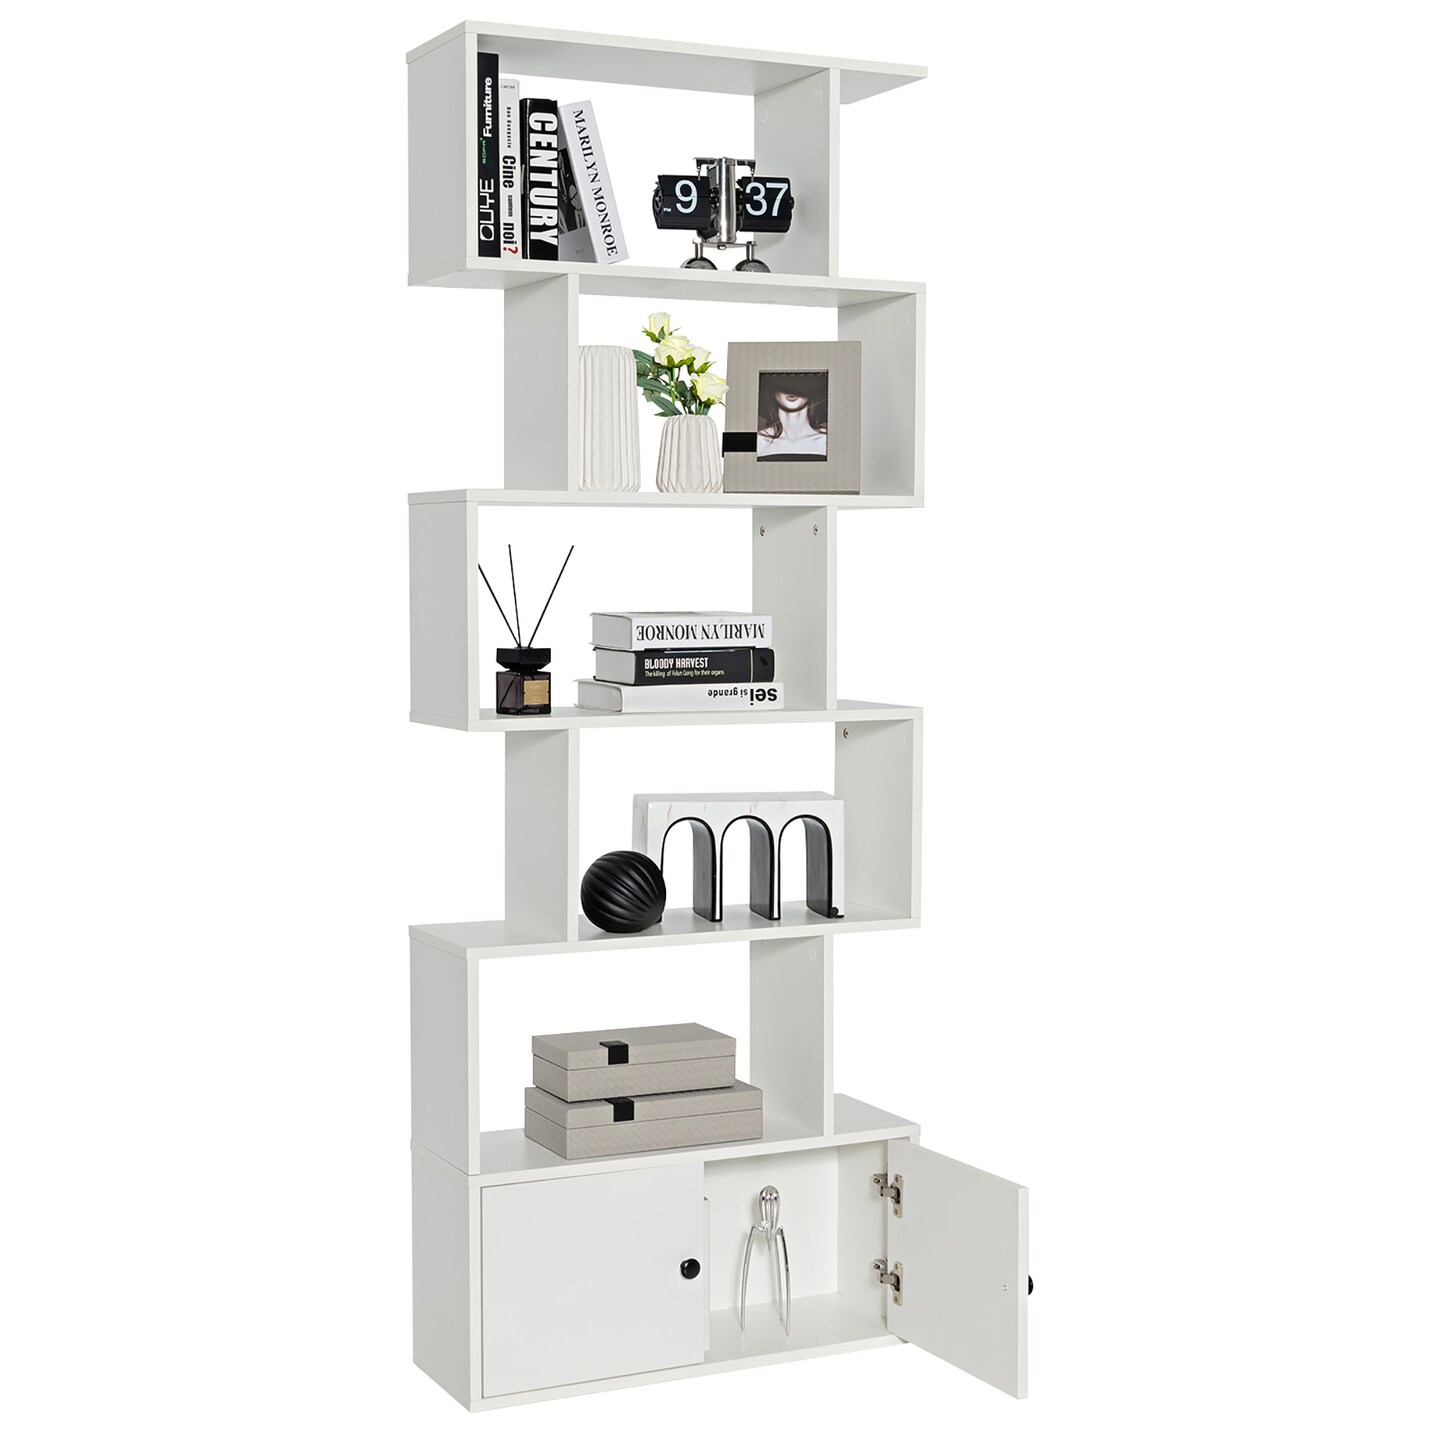 Costway 1 PC Bookshelf w/Cabinet 6-Tier S-Shaped Bookcase Storage Rack Rustic Brown\White